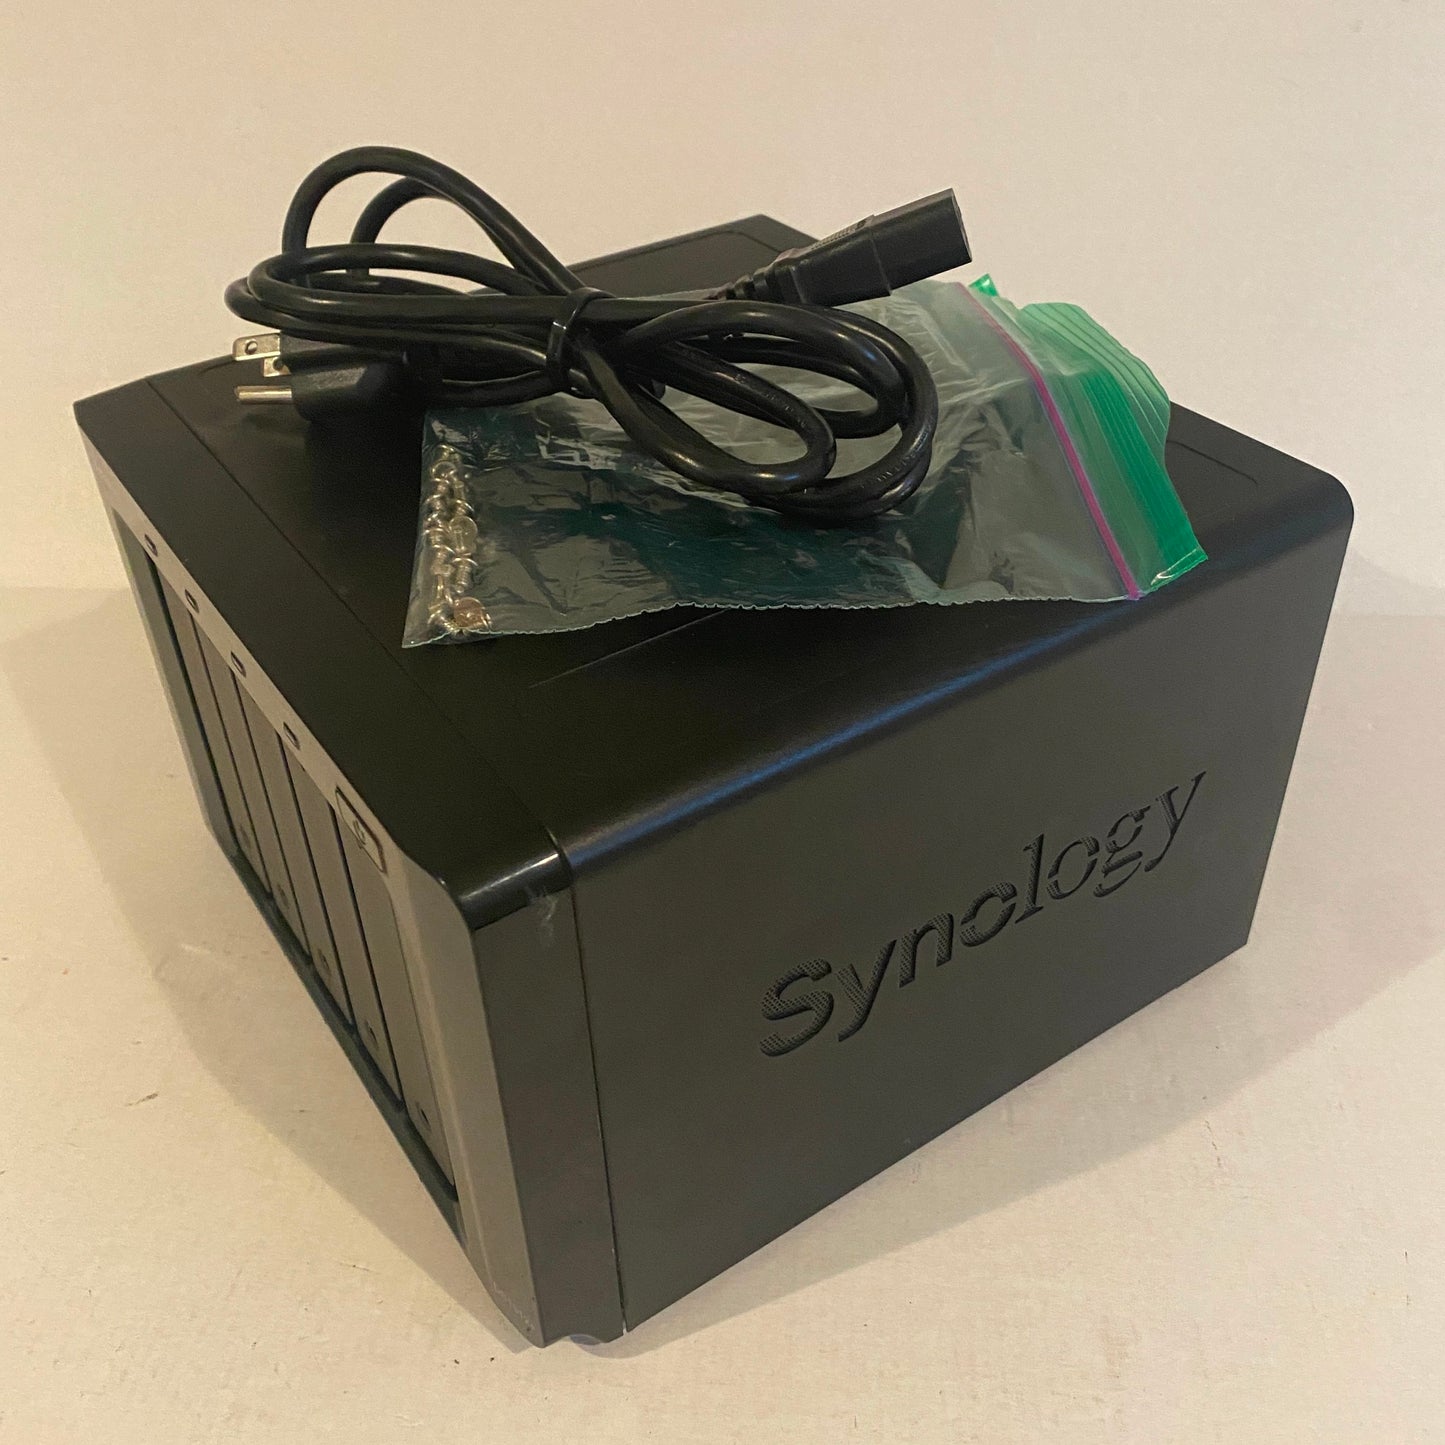 Synology Diskstation 5 Bay Network Attached Storage Device - DS1512+